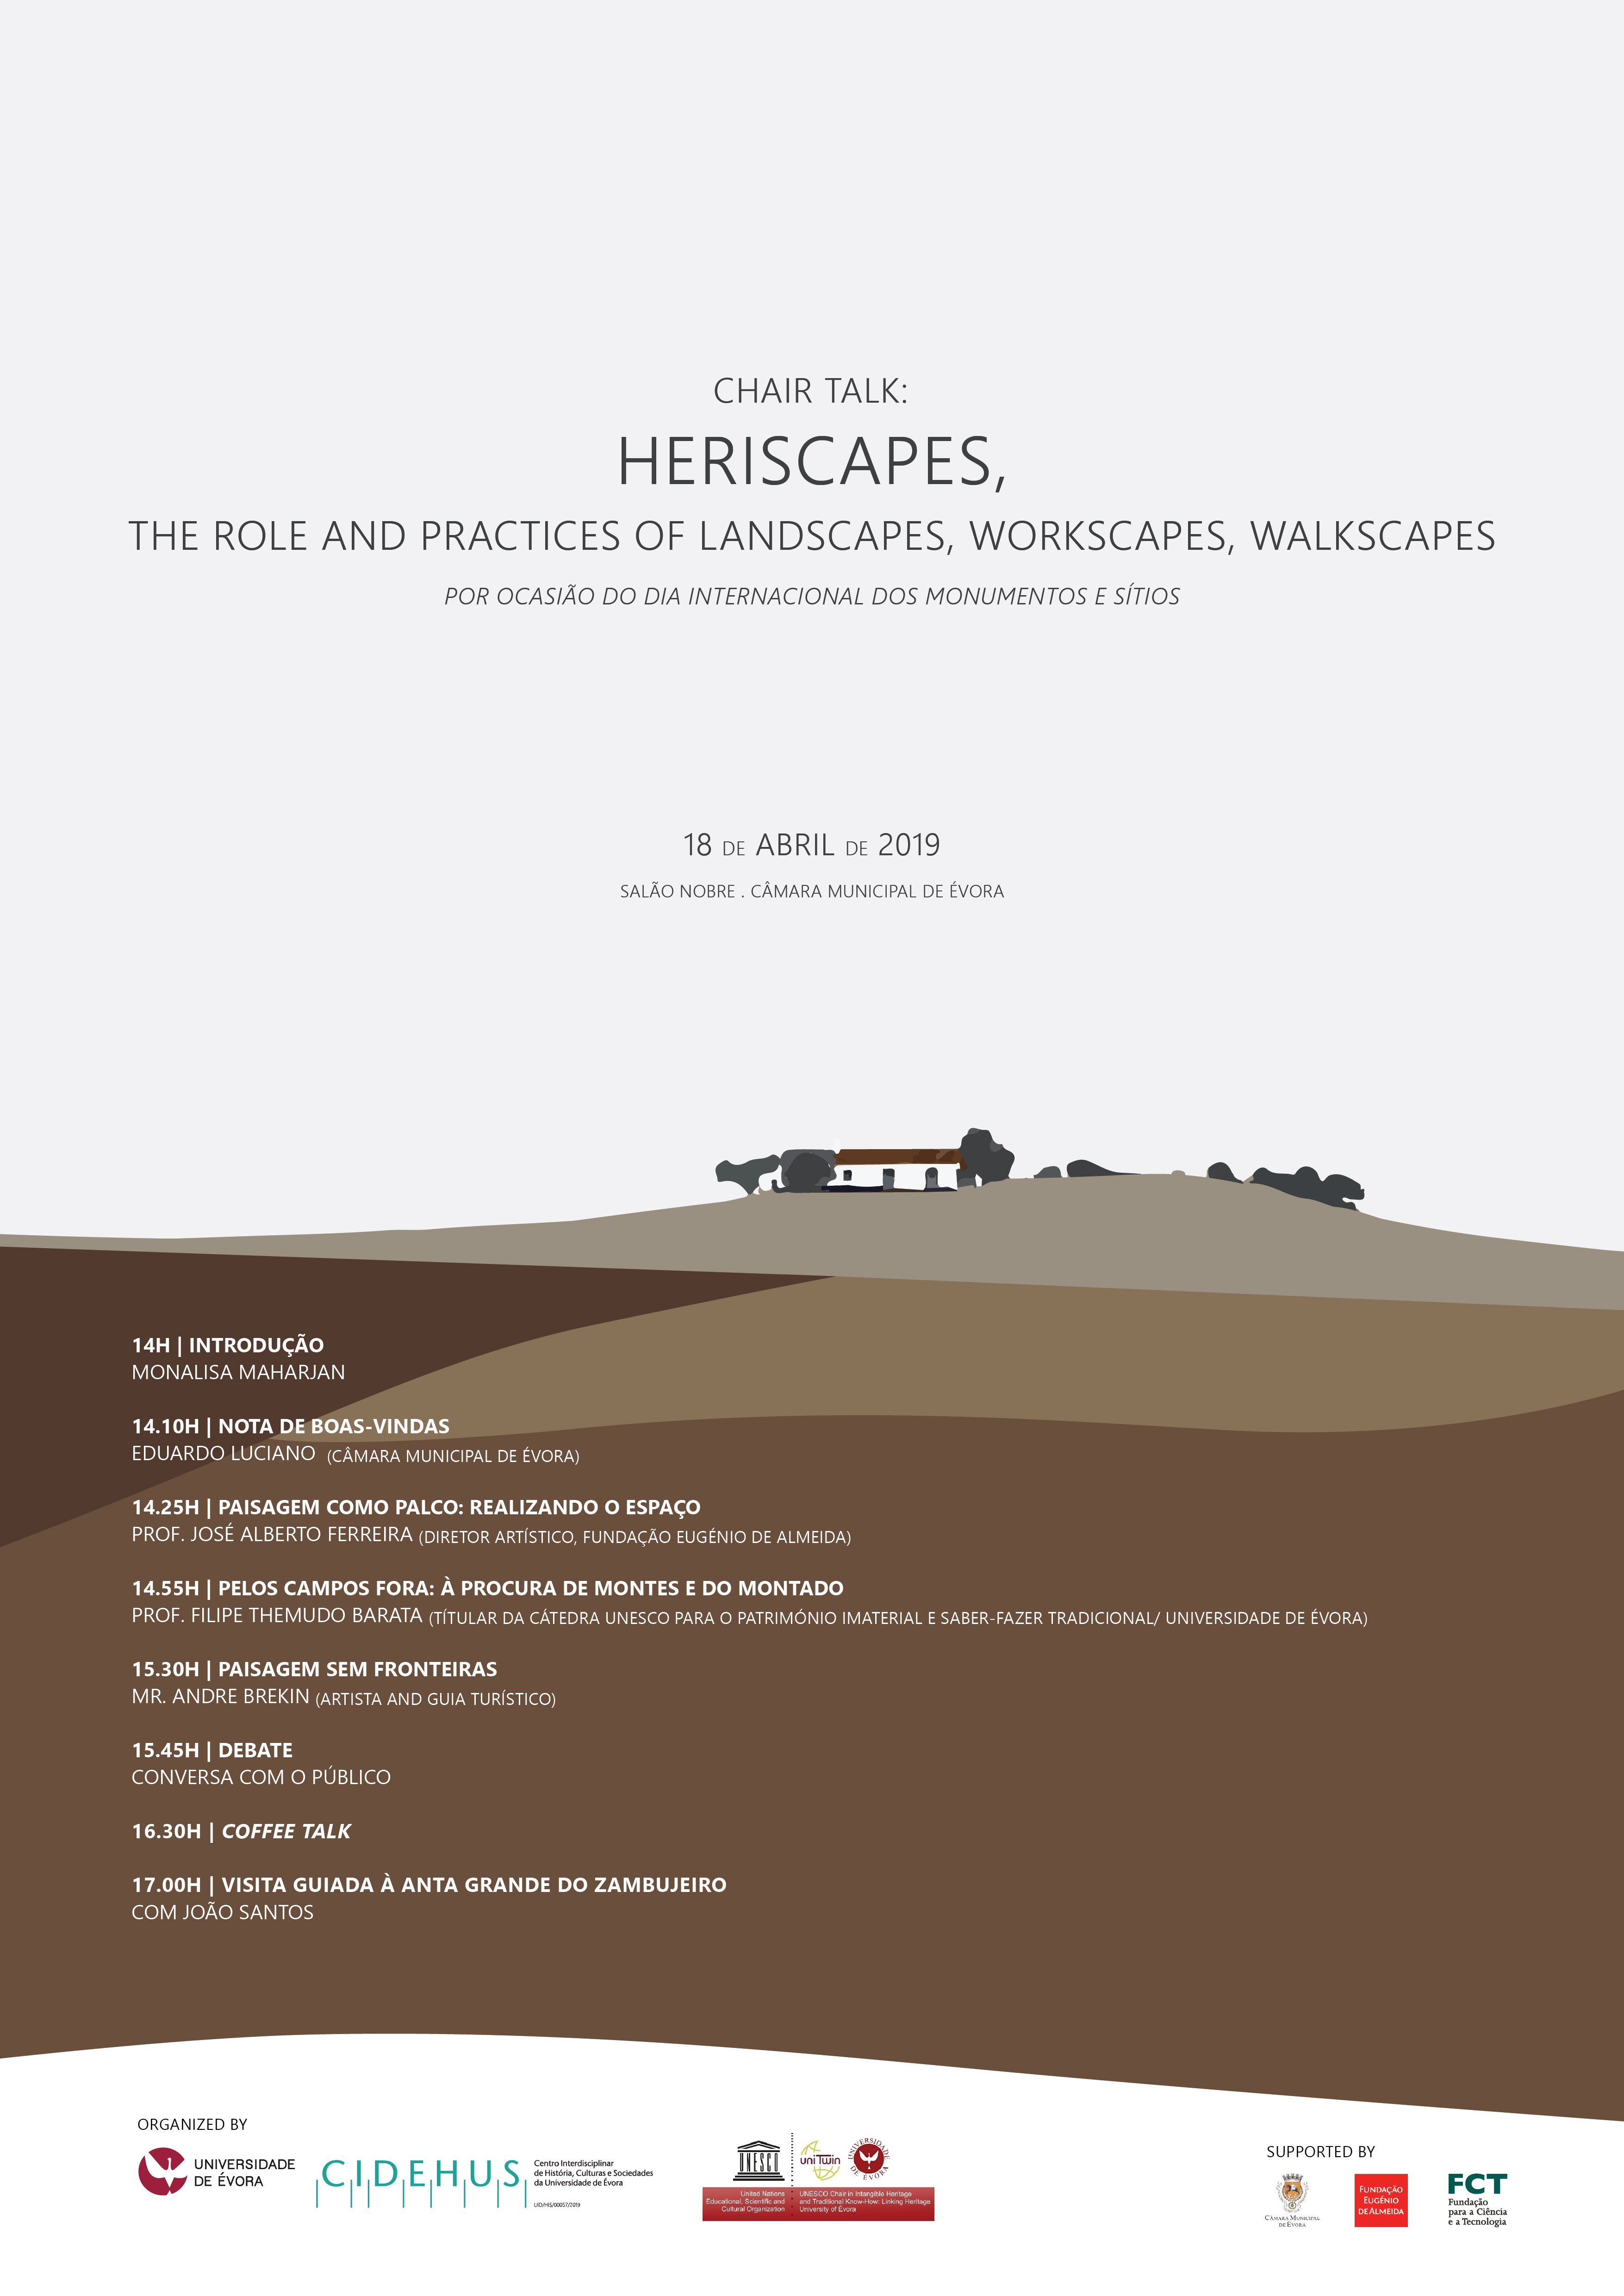  HERISCAPES, the role and practices of landscapes, workscapes, walkscapes 